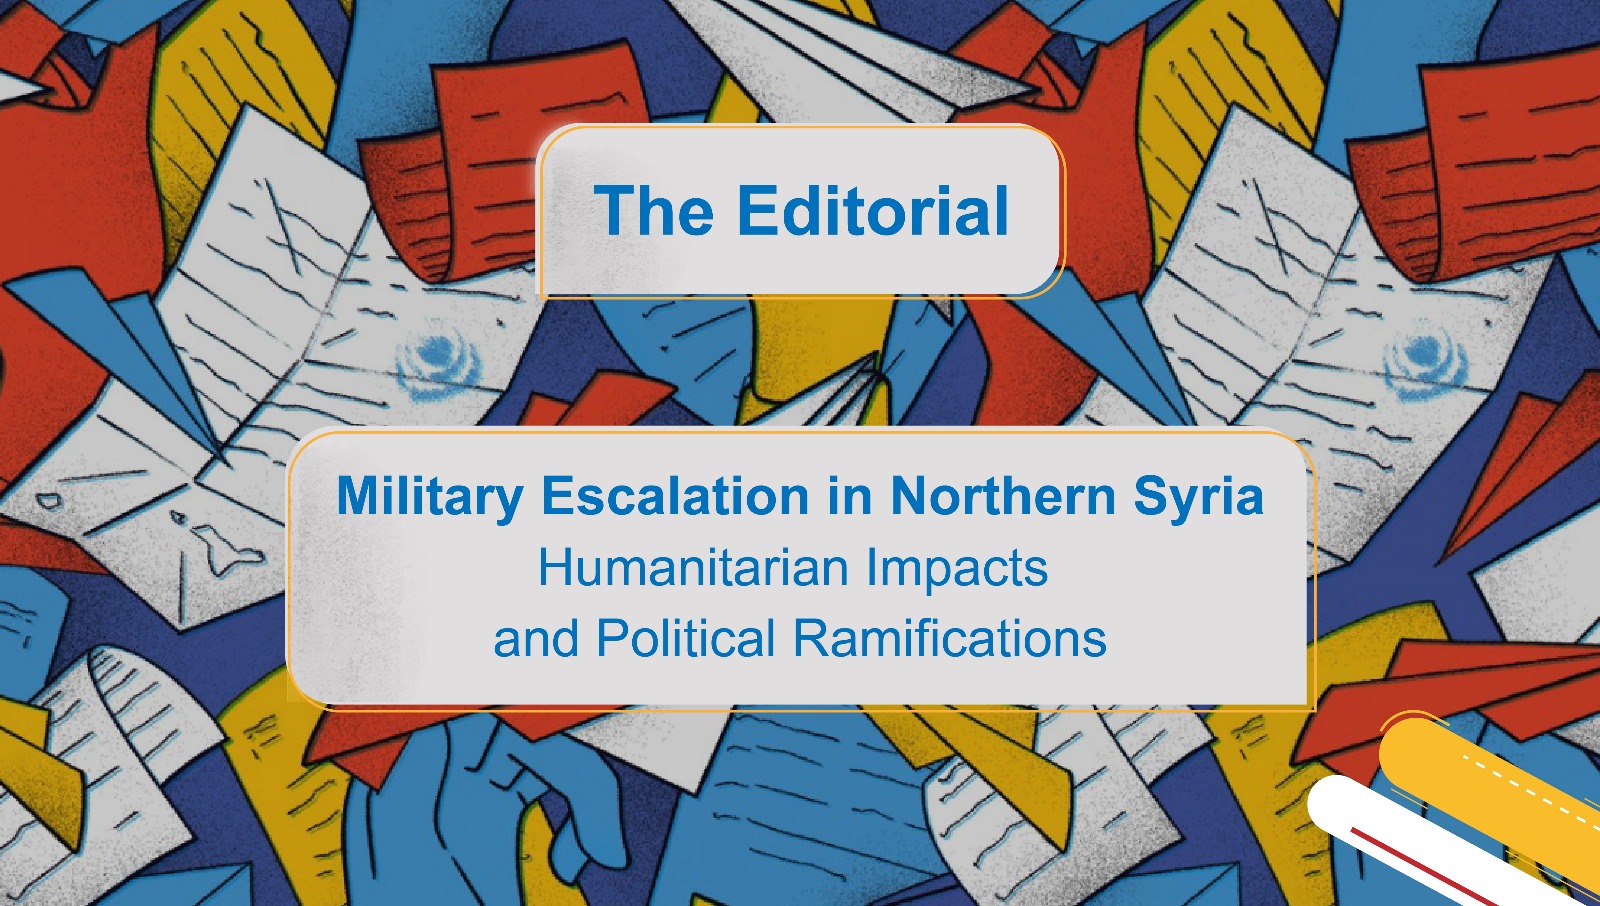 Military Escalation in Northern Syria: Humanitarian Impacts and Political Ramifications